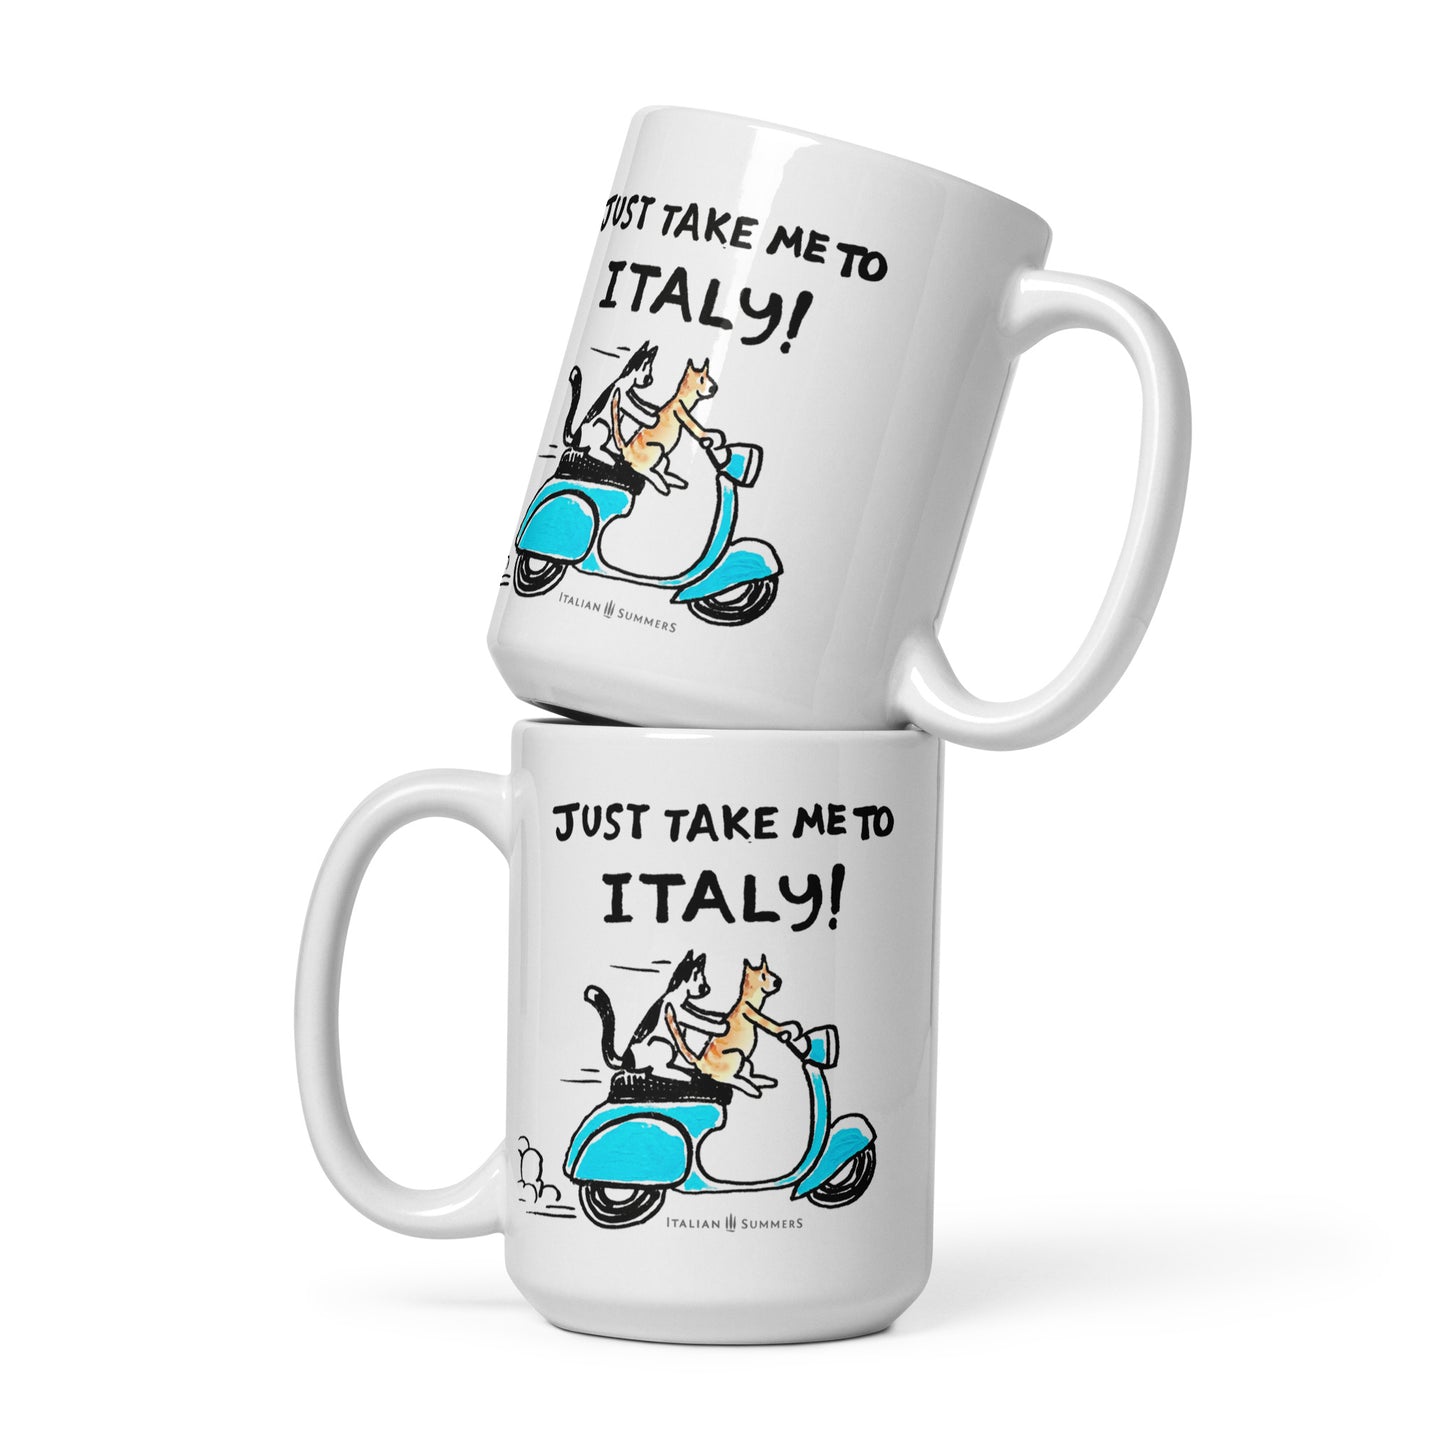 Italy inspired coffee mug with the quote "Just take me to Italy" with the sketch of two happy cats (one red and one black and white) driving a aqua blue vintage scooter and are on their way to Italy, Comes is 2 sizes 11oz and 15 oz. Made by Italian Summers